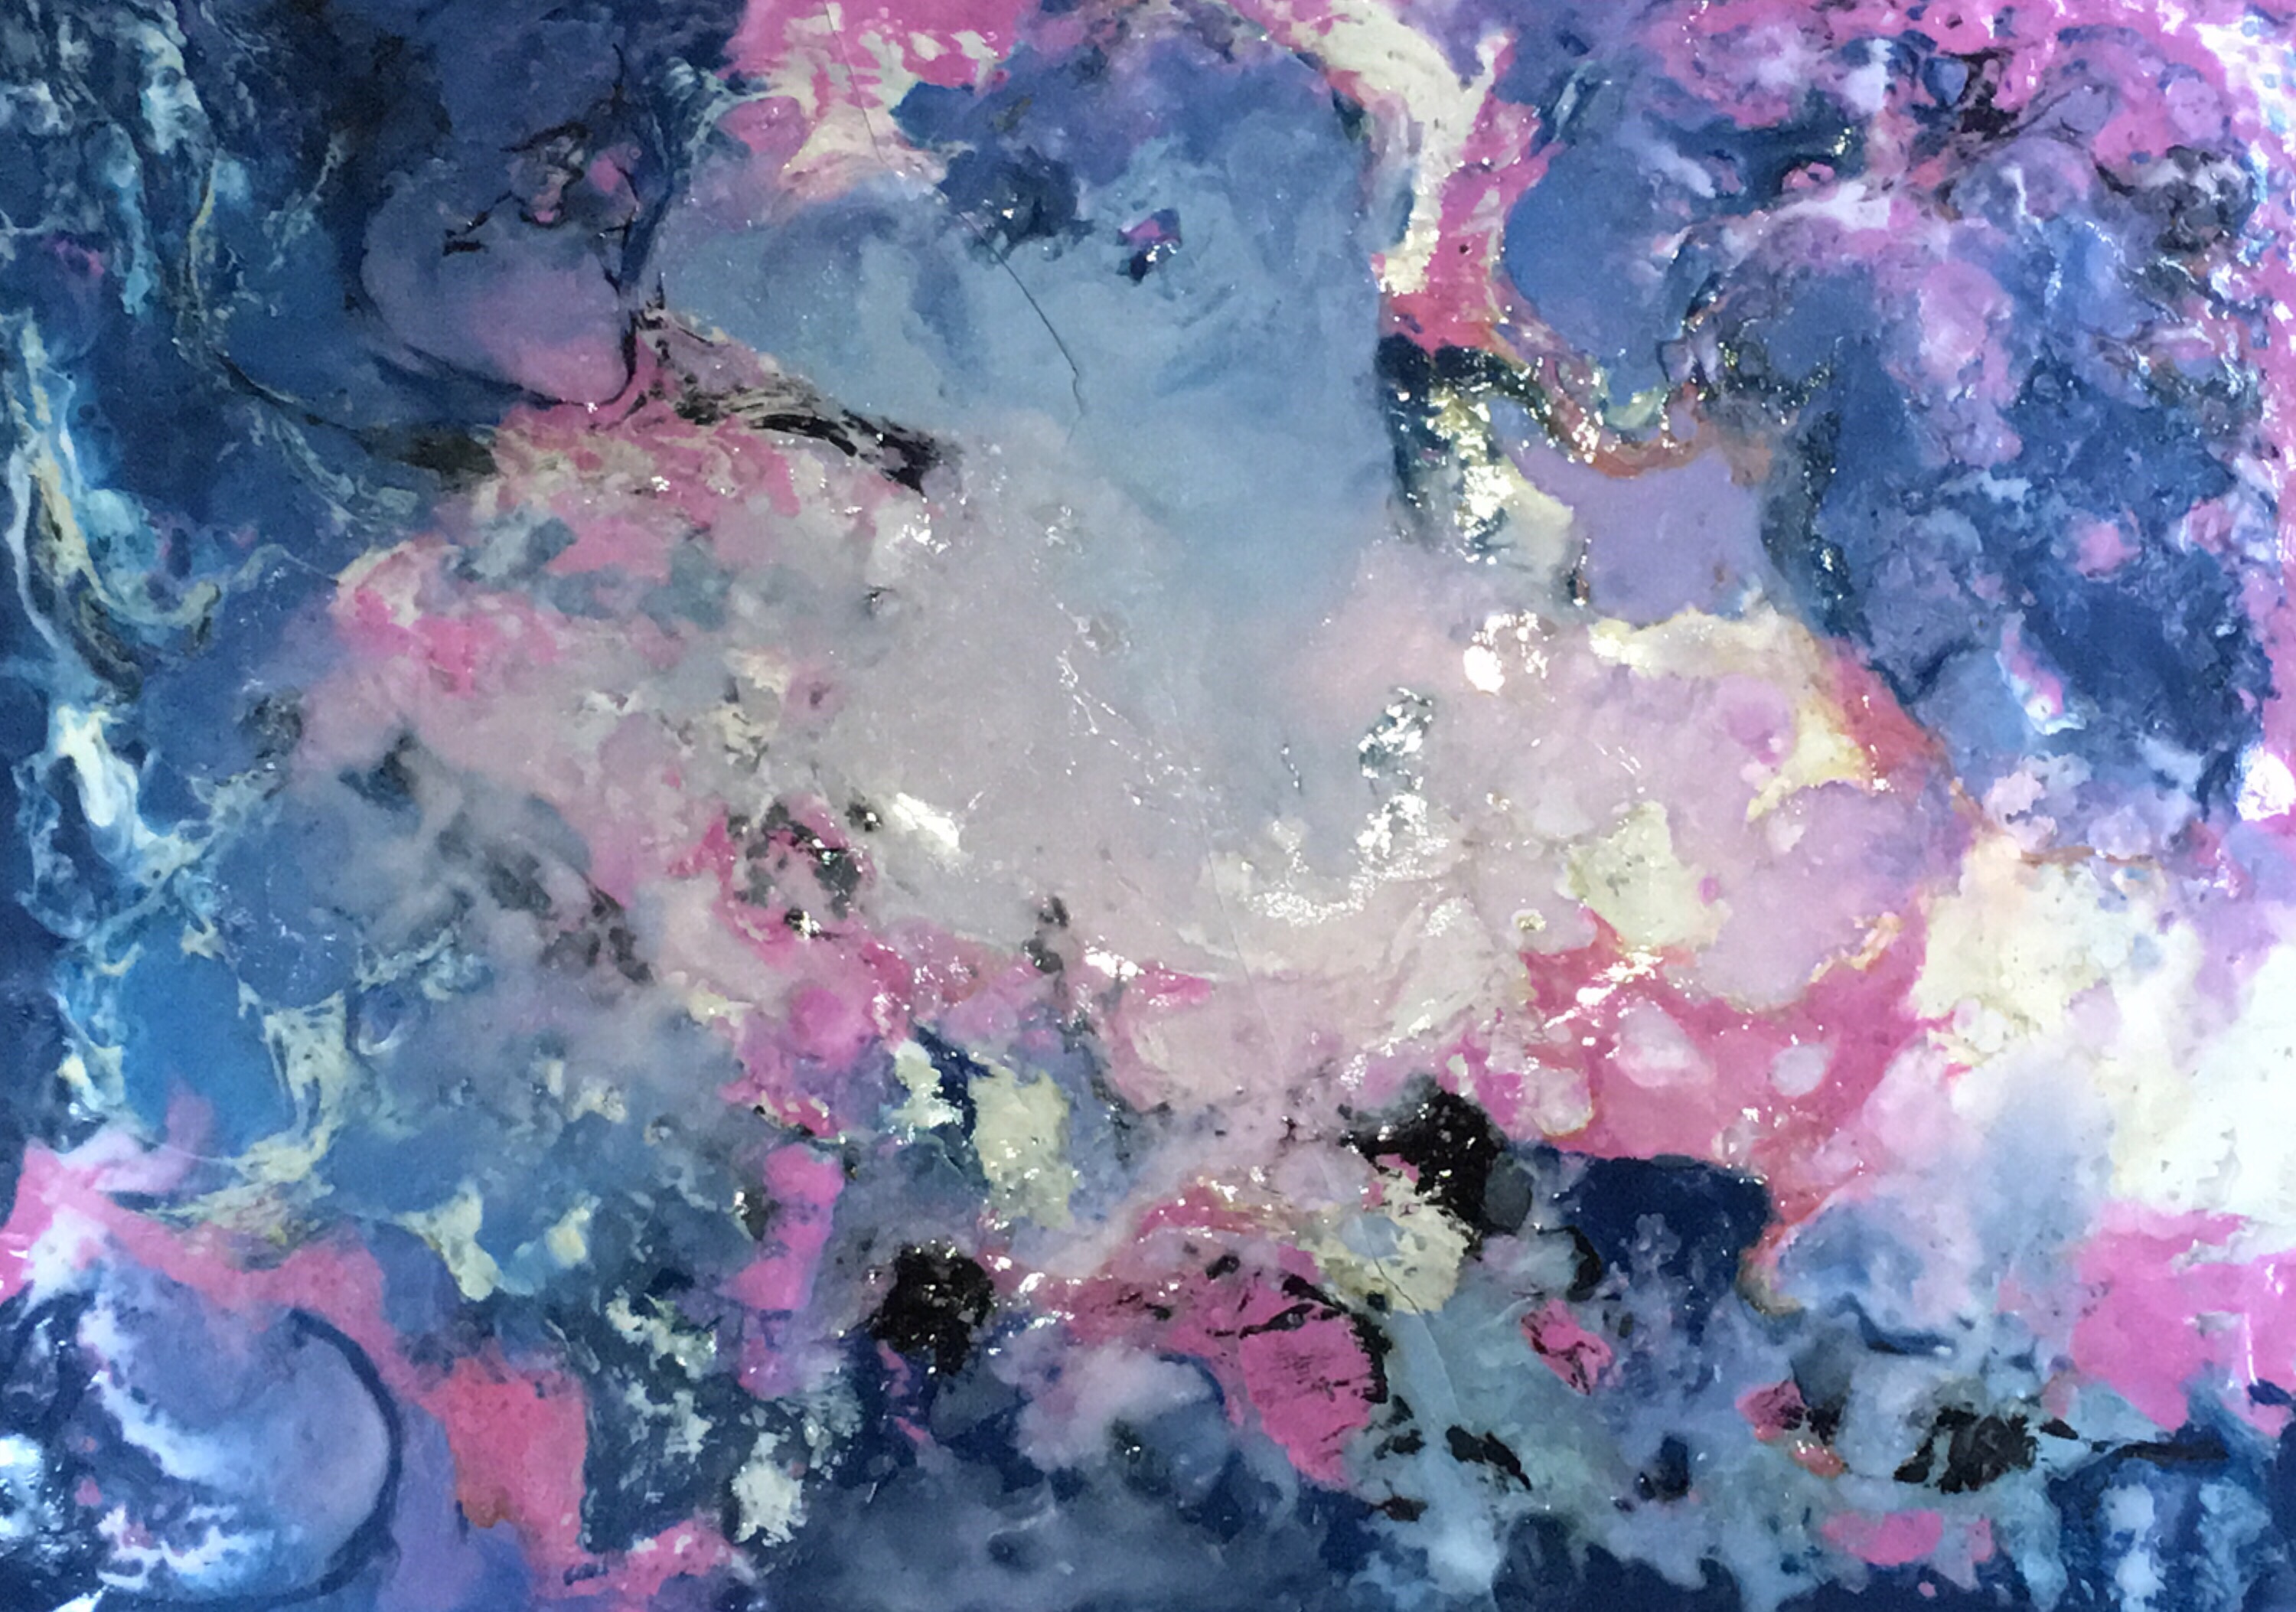 Pink Marble, Encaustic, saeta and shellac technique on paper, 15x21